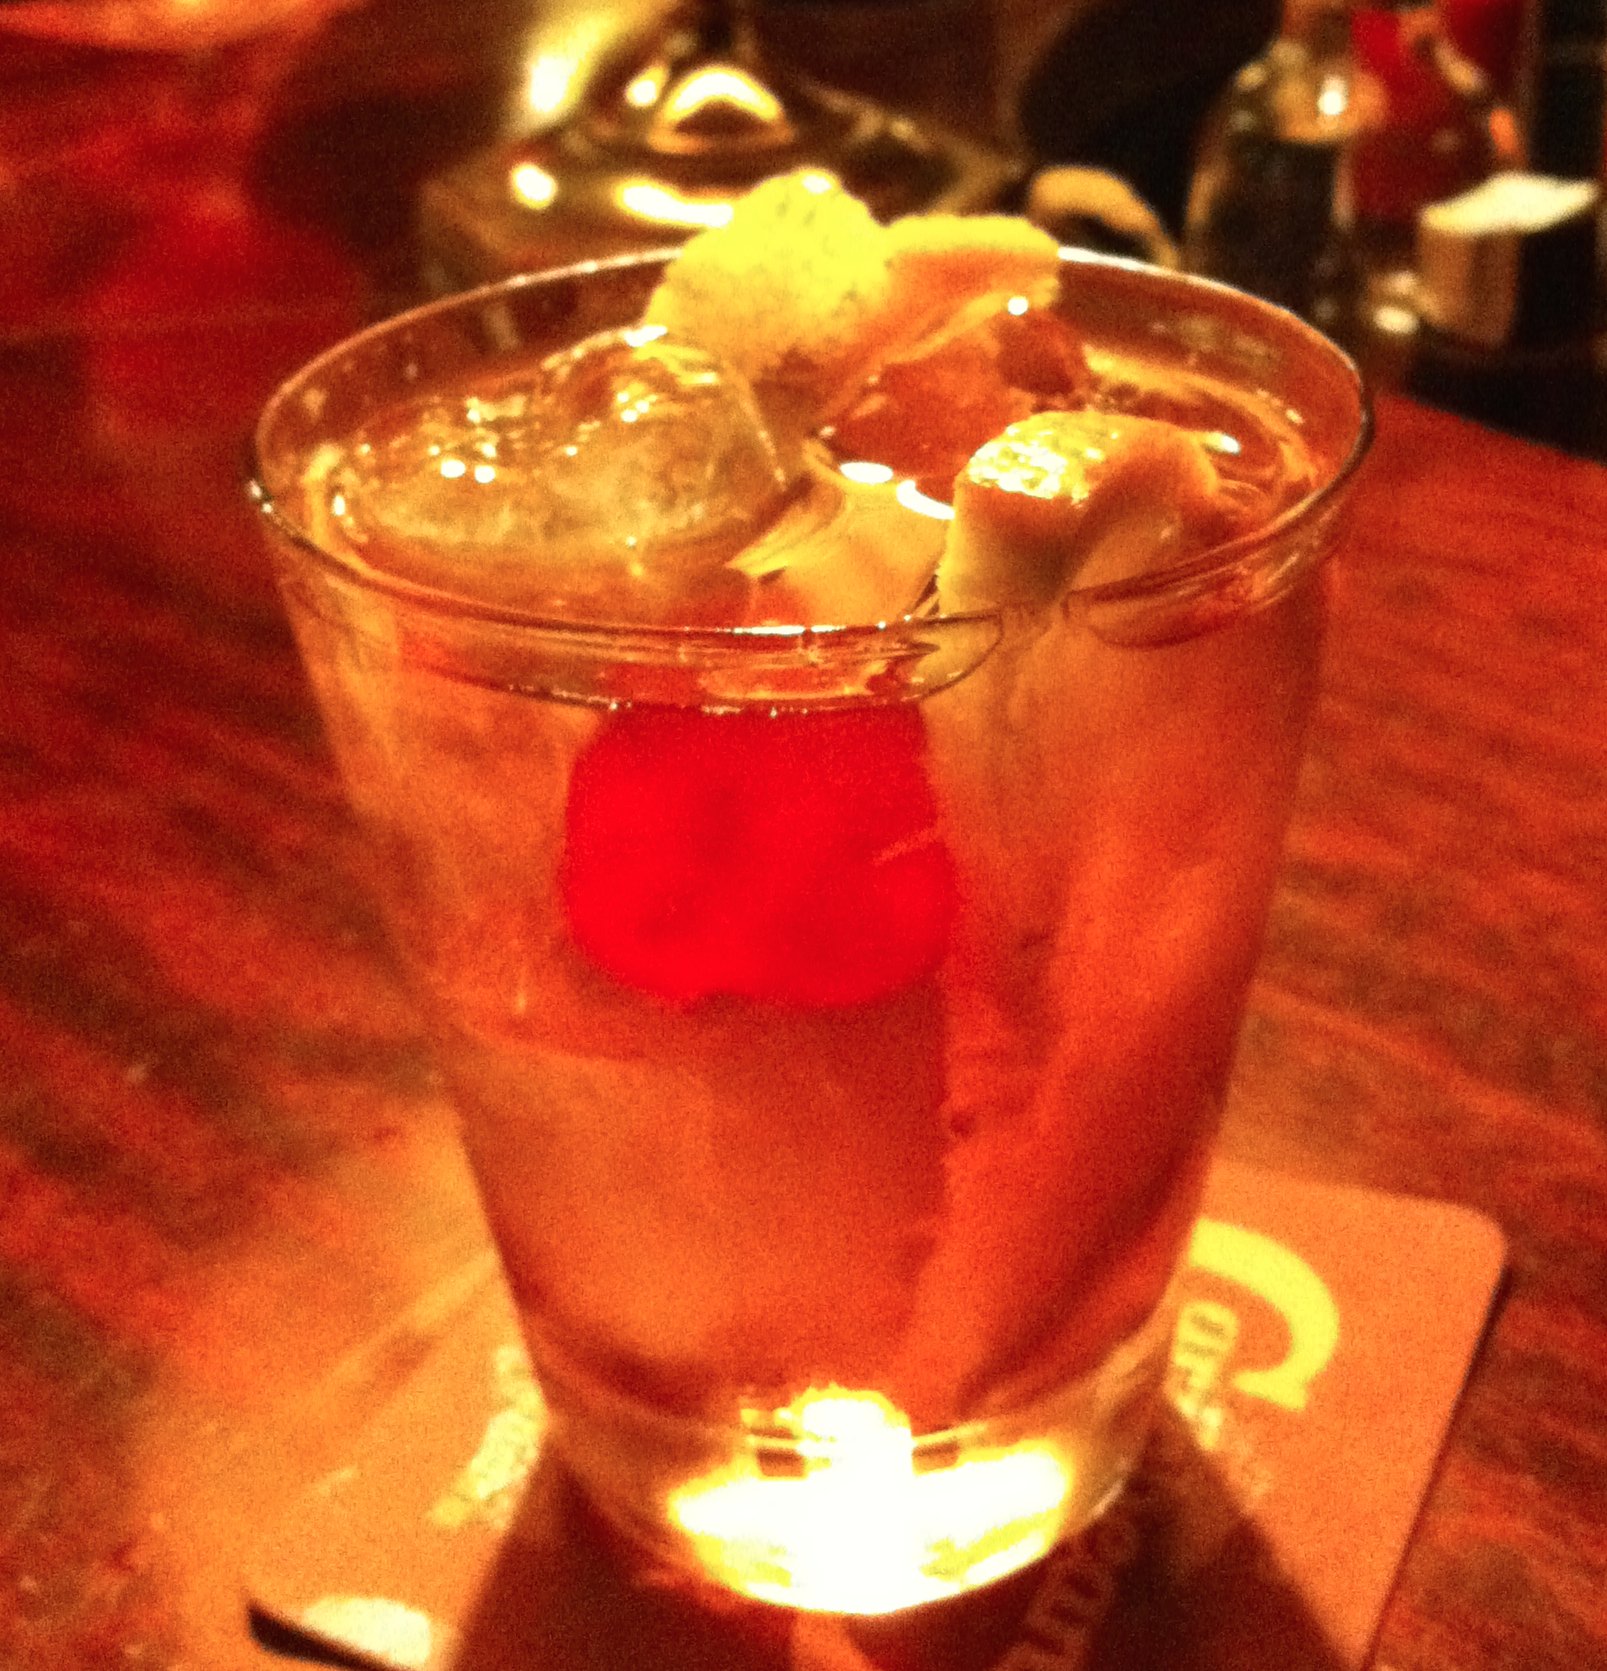 The Wisconsin unofficial state cocktail is the Brandy Old Fashioned.